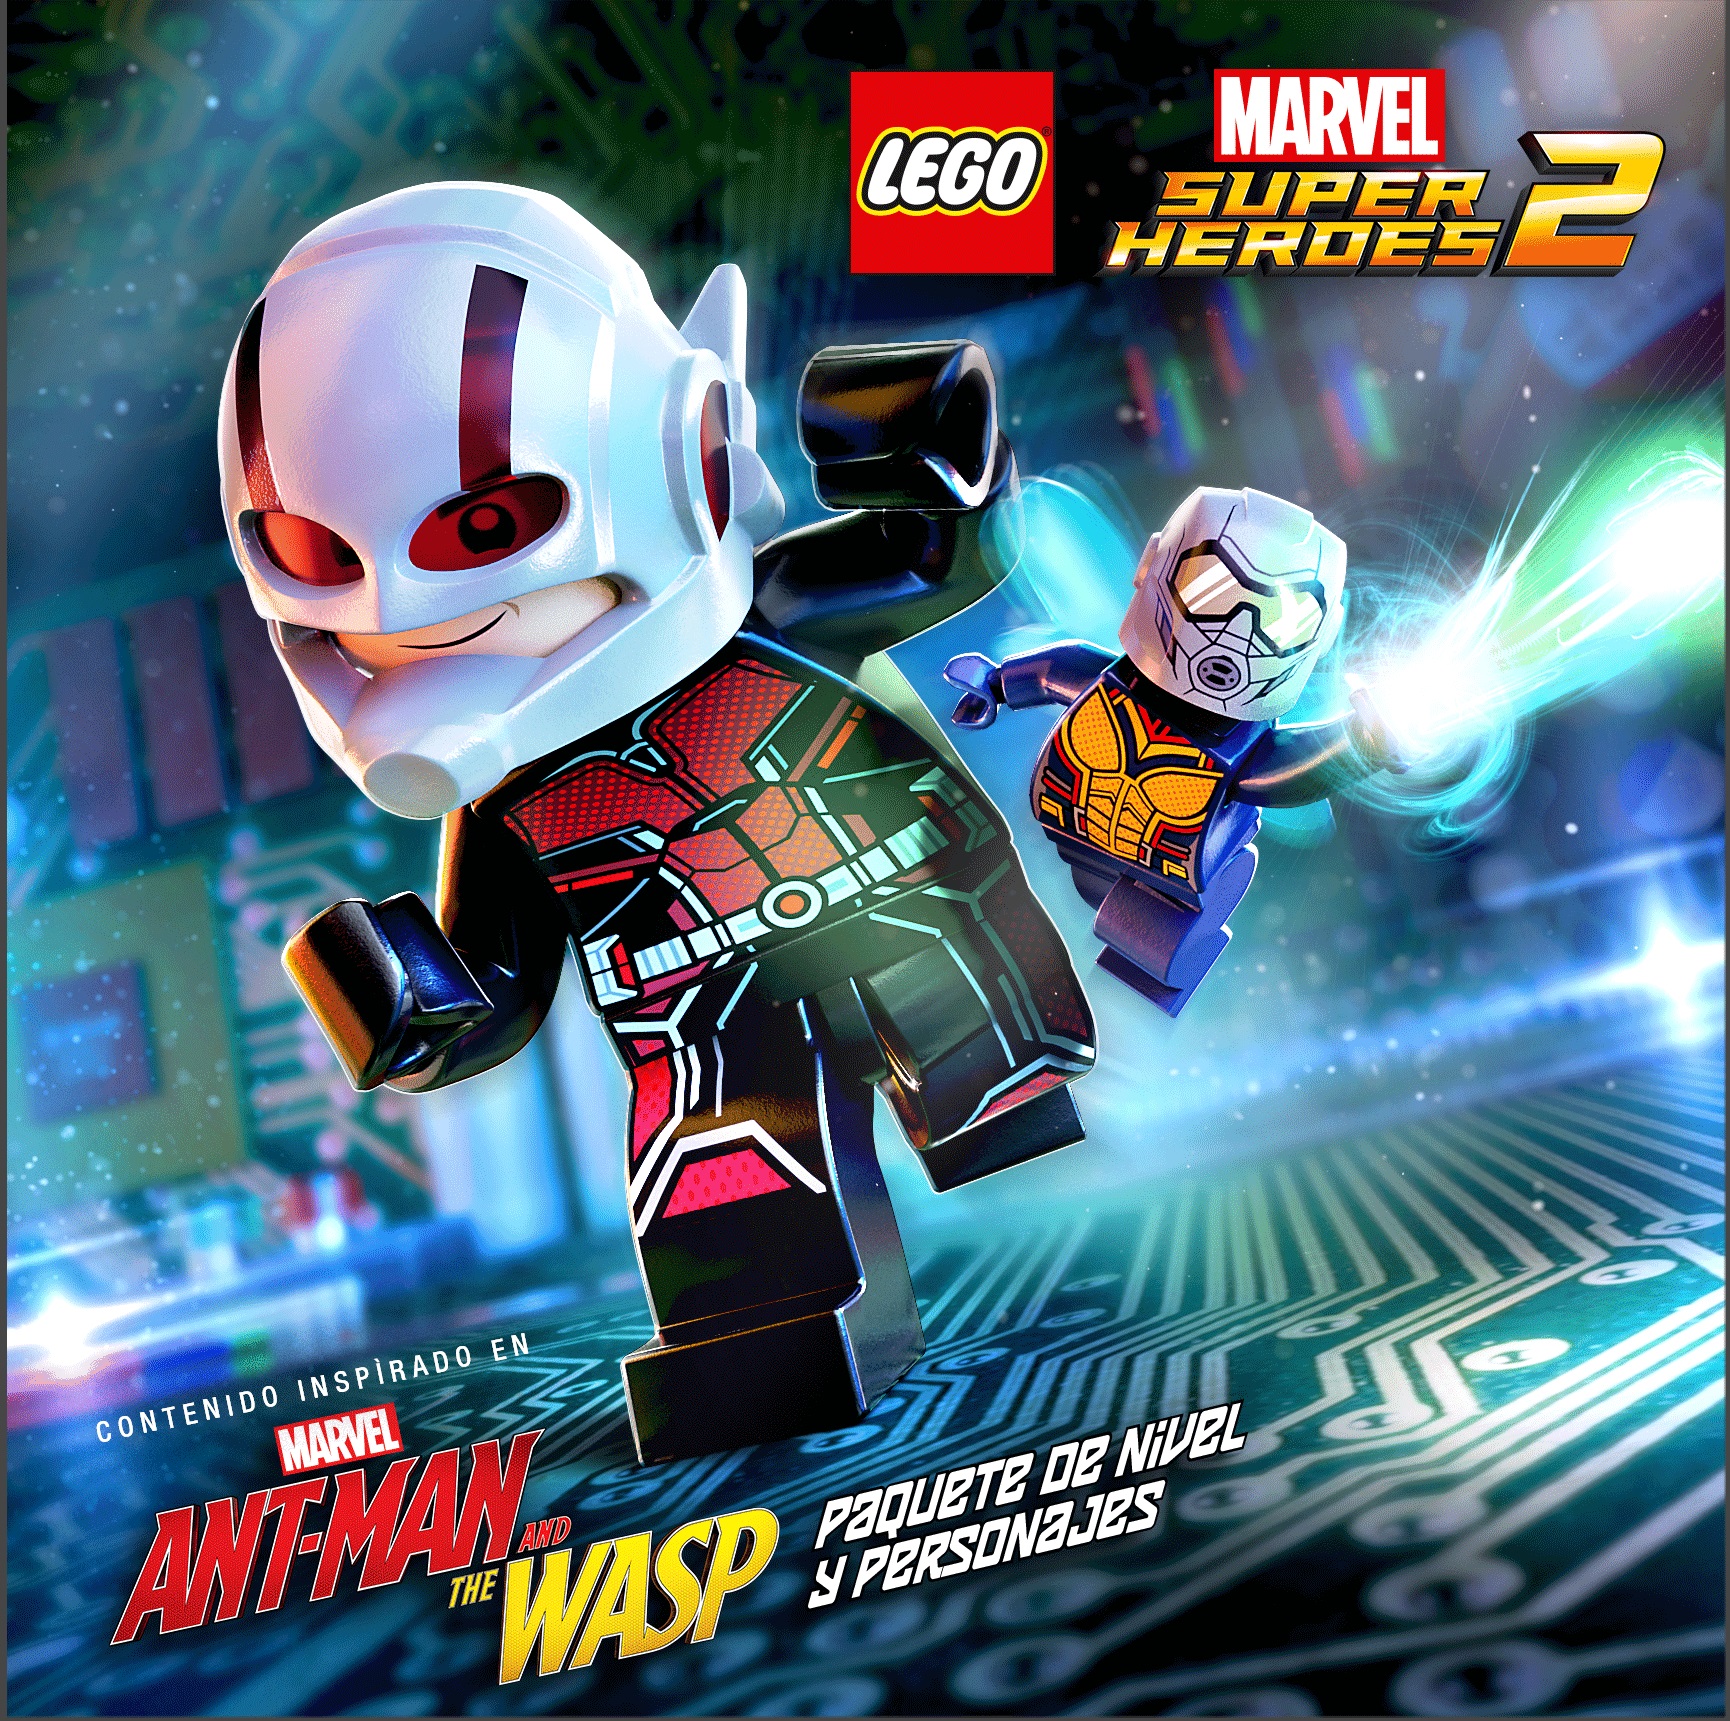 LEGO® Marvel Super Heroes 2-Marvel Ant-Man and the Wasp-GamersRD